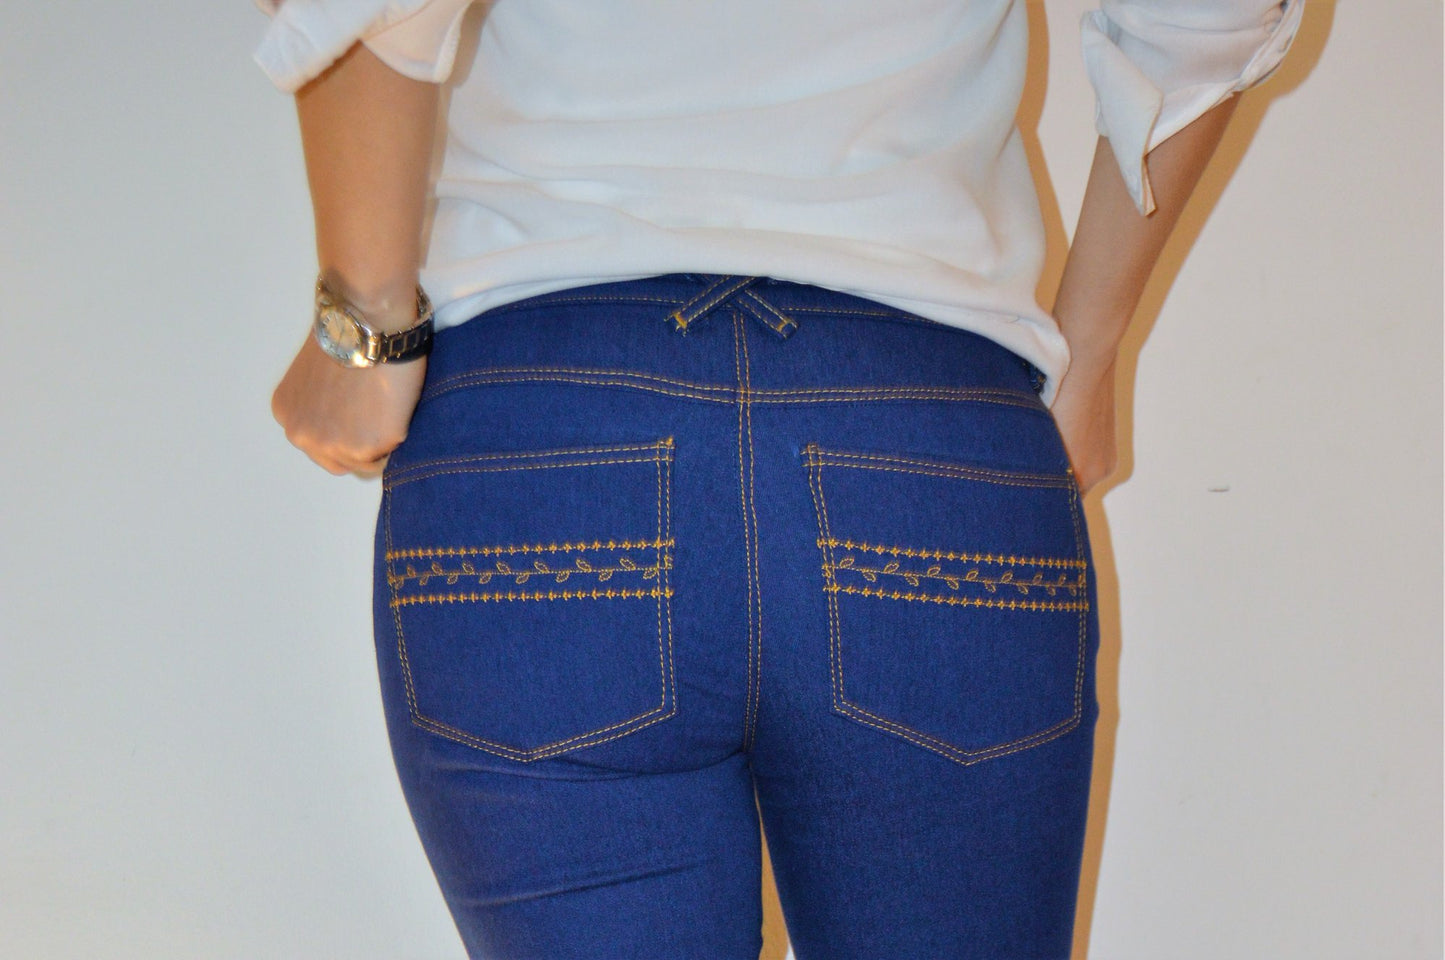 Closeup view of back pockets with decorative stitching